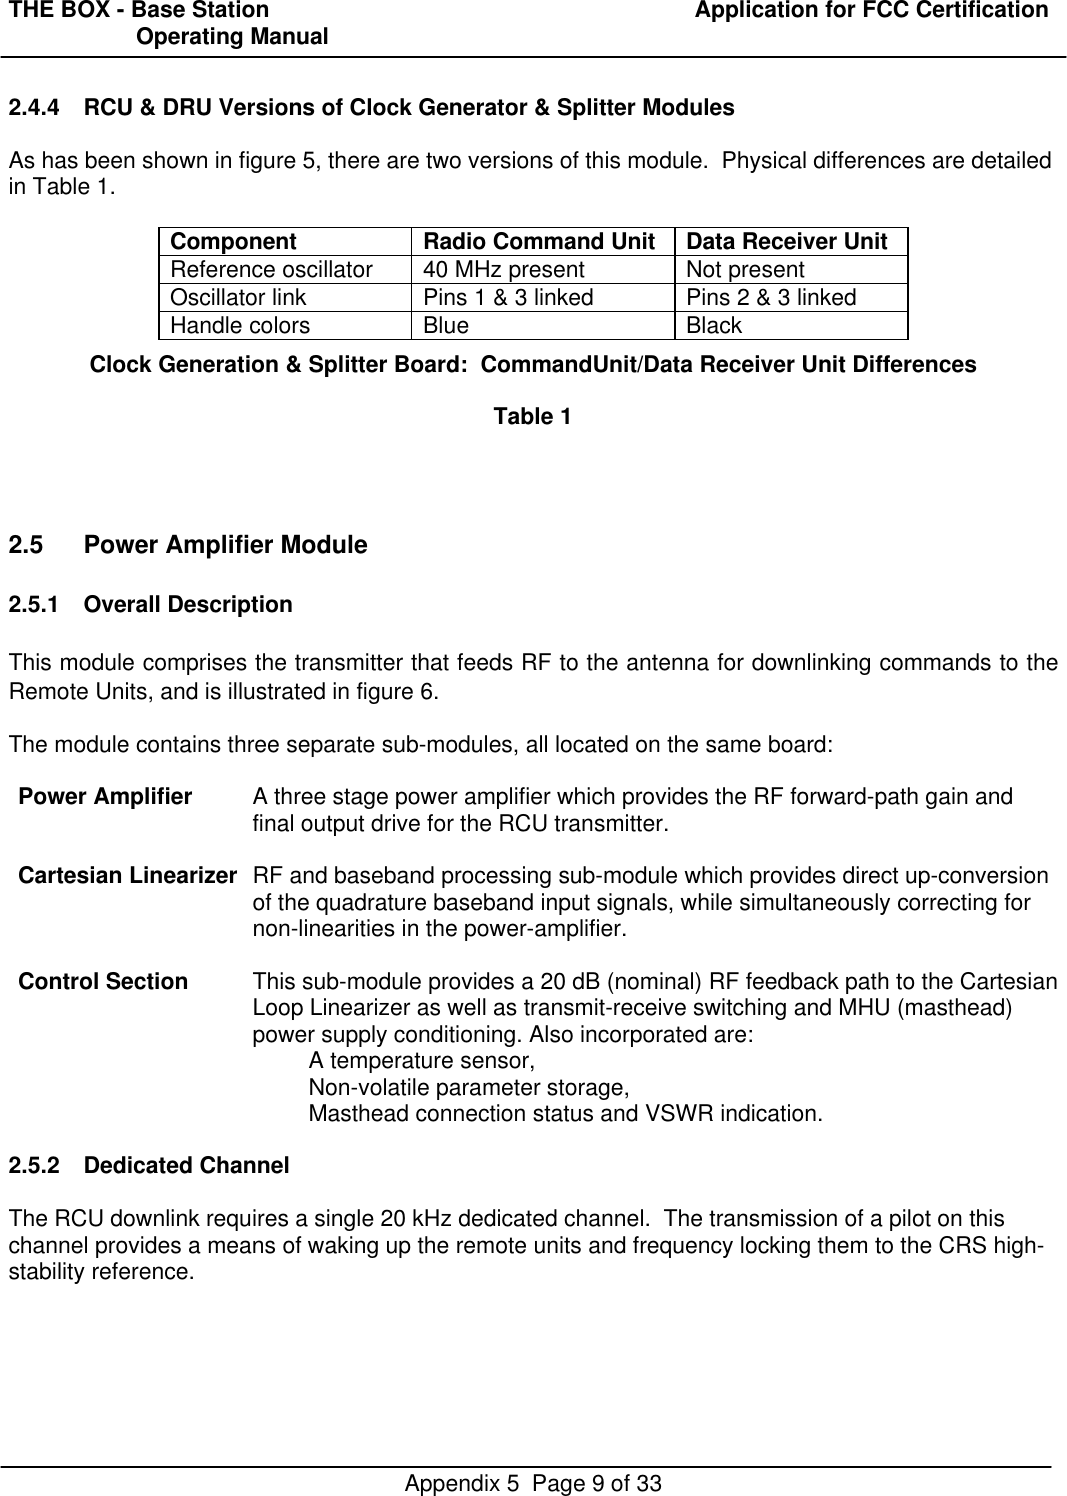 THE BOX - Base Station  Application for FCC Certification                    Operating ManualAppendix 5  Page 9 of 332.4.4 RCU &amp; DRU Versions of Clock Generator &amp; Splitter ModulesAs has been shown in figure 5, there are two versions of this module.  Physical differences are detailedin Table 1.Component Radio Command Unit Data Receiver UnitReference oscillator 40 MHz present Not presentOscillator link Pins 1 &amp; 3 linked Pins 2 &amp; 3 linkedHandle colors Blue BlackClock Generation &amp; Splitter Board:  CommandUnit/Data Receiver Unit DifferencesTable 12.5 Power Amplifier Module2.5.1 Overall DescriptionThis module comprises the transmitter that feeds RF to the antenna for downlinking commands to theRemote Units, and is illustrated in figure 6.The module contains three separate sub-modules, all located on the same board:Power Amplifier A three stage power amplifier which provides the RF forward-path gain andfinal output drive for the RCU transmitter.Cartesian Linearizer RF and baseband processing sub-module which provides direct up-conversionof the quadrature baseband input signals, while simultaneously correcting fornon-linearities in the power-amplifier.Control Section This sub-module provides a 20 dB (nominal) RF feedback path to the CartesianLoop Linearizer as well as transmit-receive switching and MHU (masthead)power supply conditioning. Also incorporated are:A temperature sensor,Non-volatile parameter storage,Masthead connection status and VSWR indication.2.5.2 Dedicated ChannelThe RCU downlink requires a single 20 kHz dedicated channel.  The transmission of a pilot on thischannel provides a means of waking up the remote units and frequency locking them to the CRS high-stability reference.